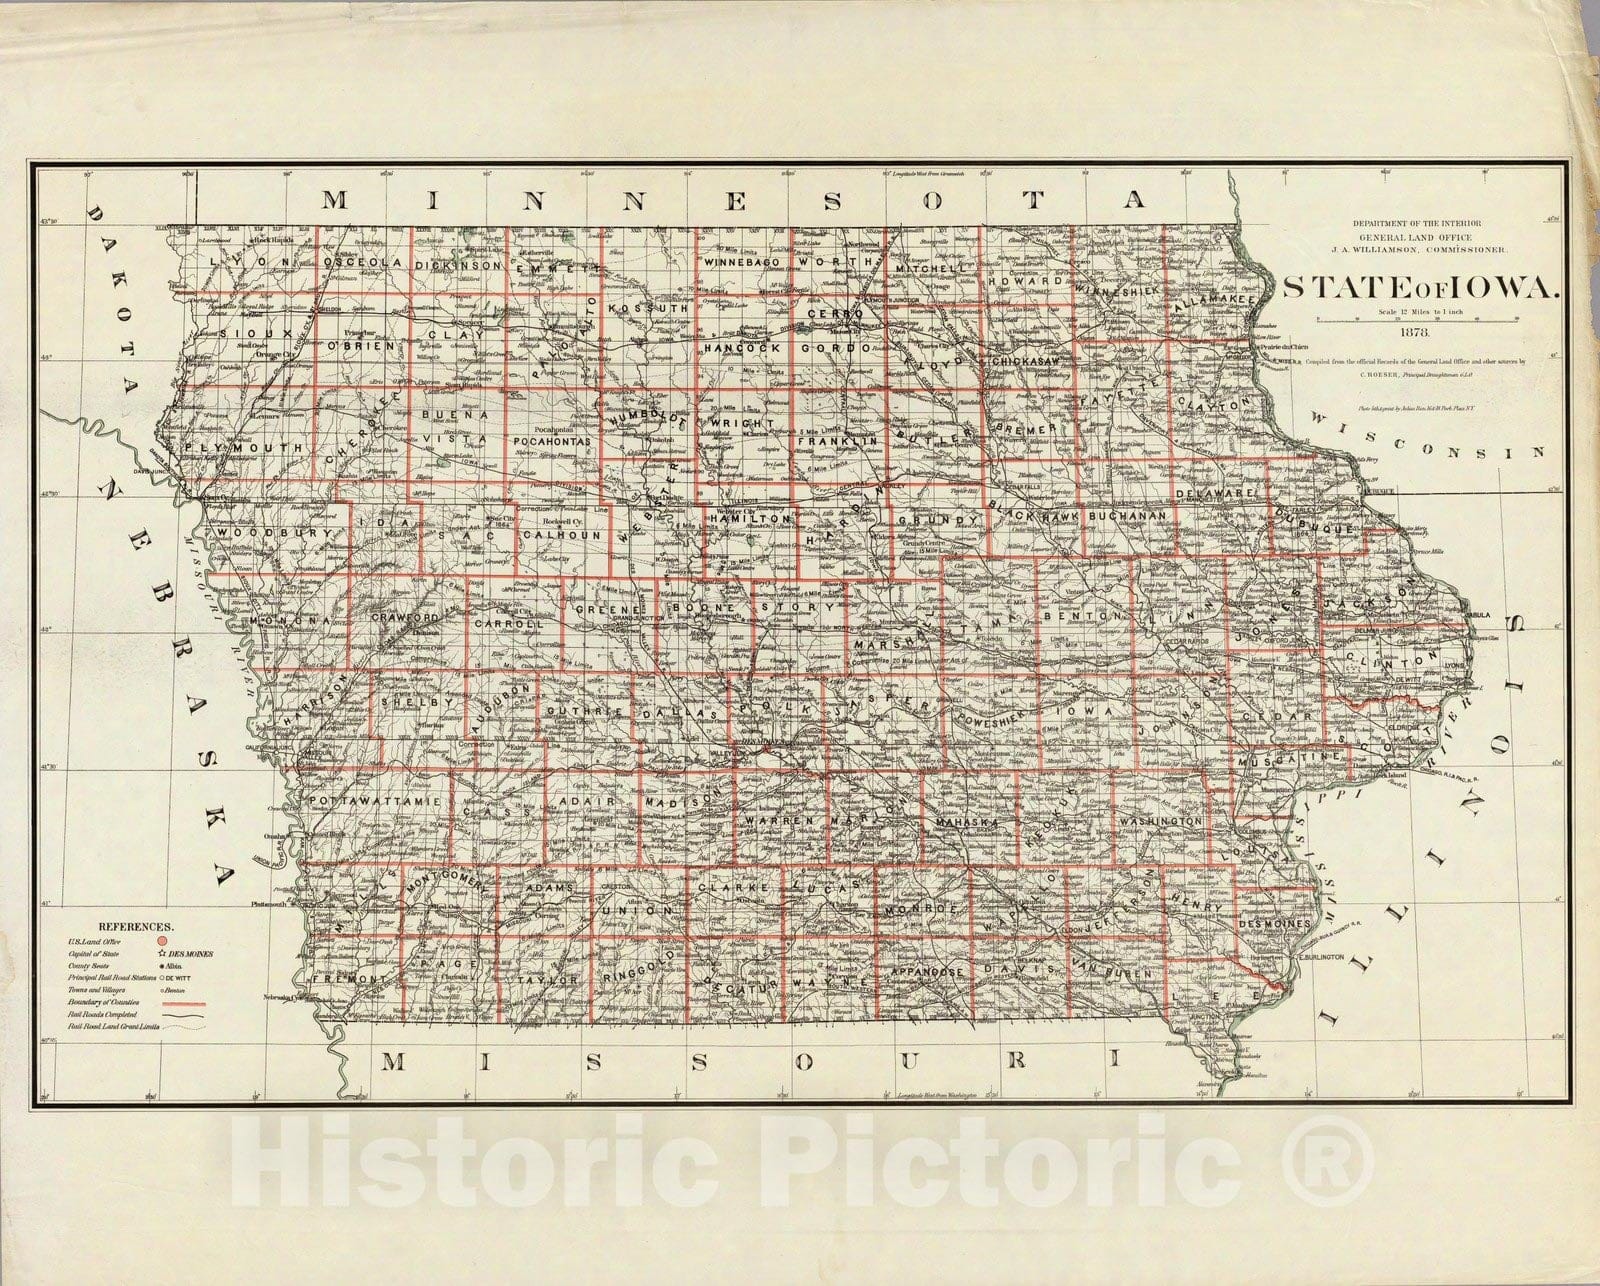 Historic Map : Department of The Interior General Land office Map - State of Iowa. 1878 - Vintage Wall Art